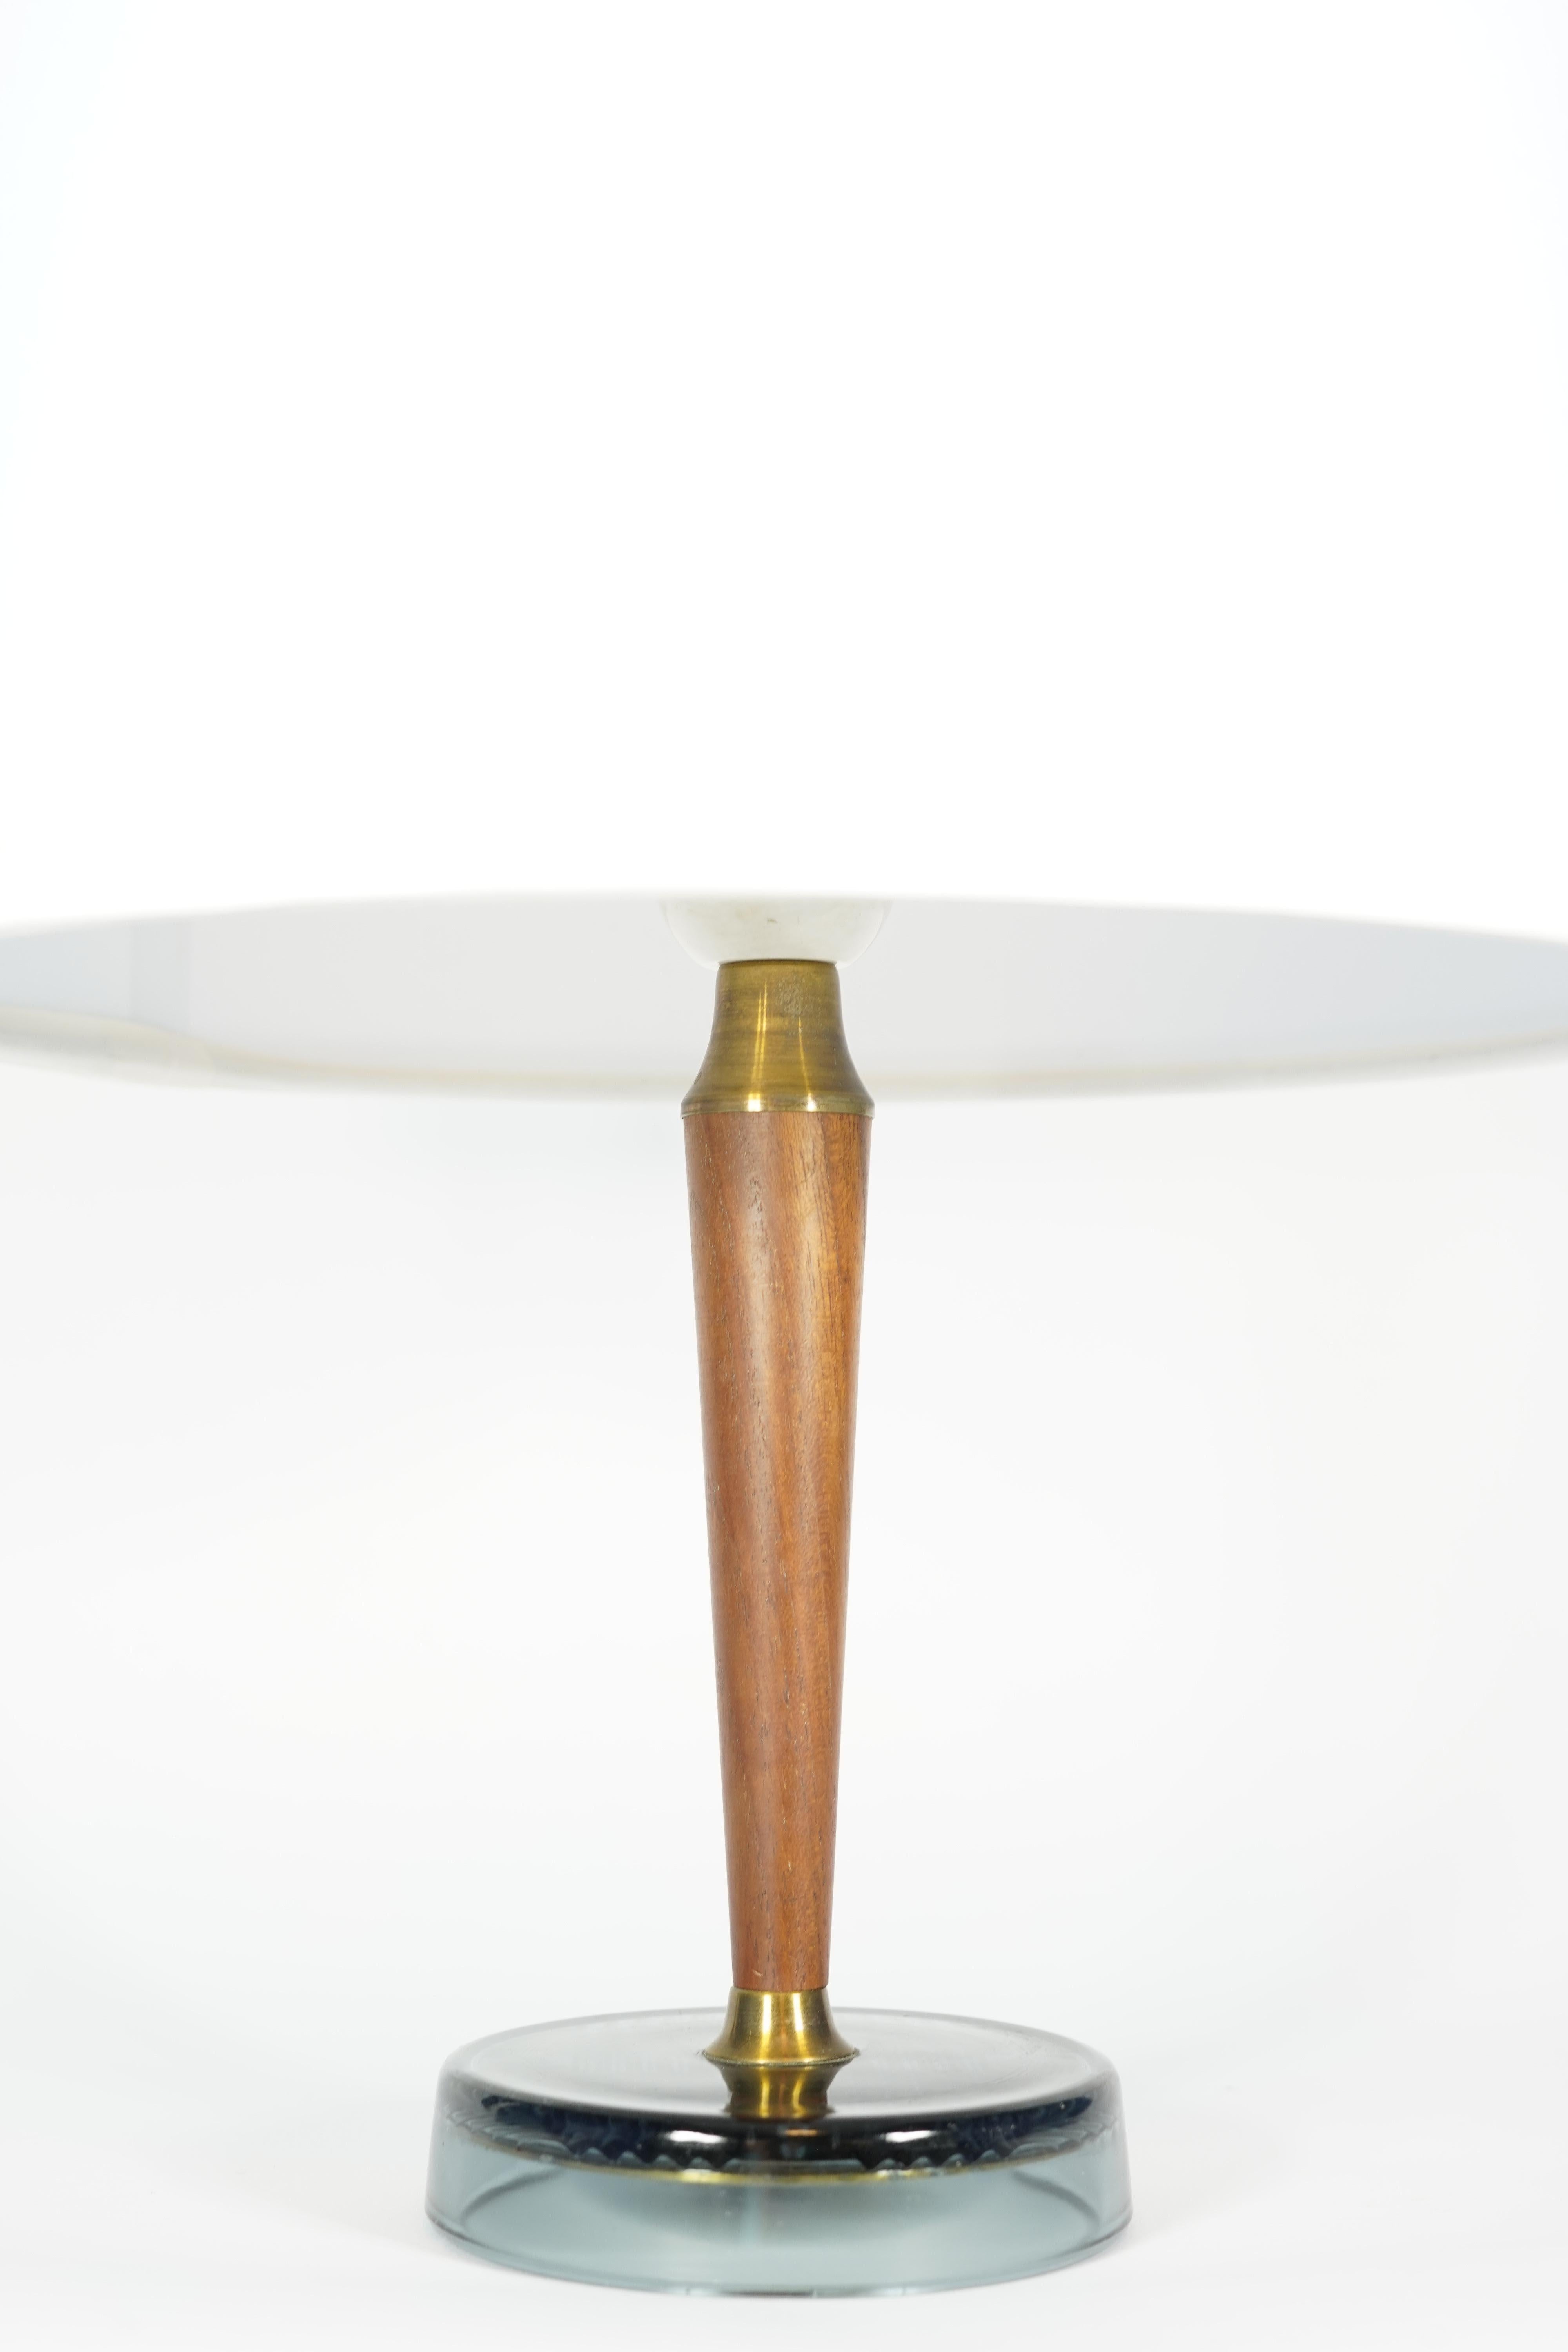 Swedish Midcentury Teak/Brass and Glass Lamp, Sweden, 1950 For Sale